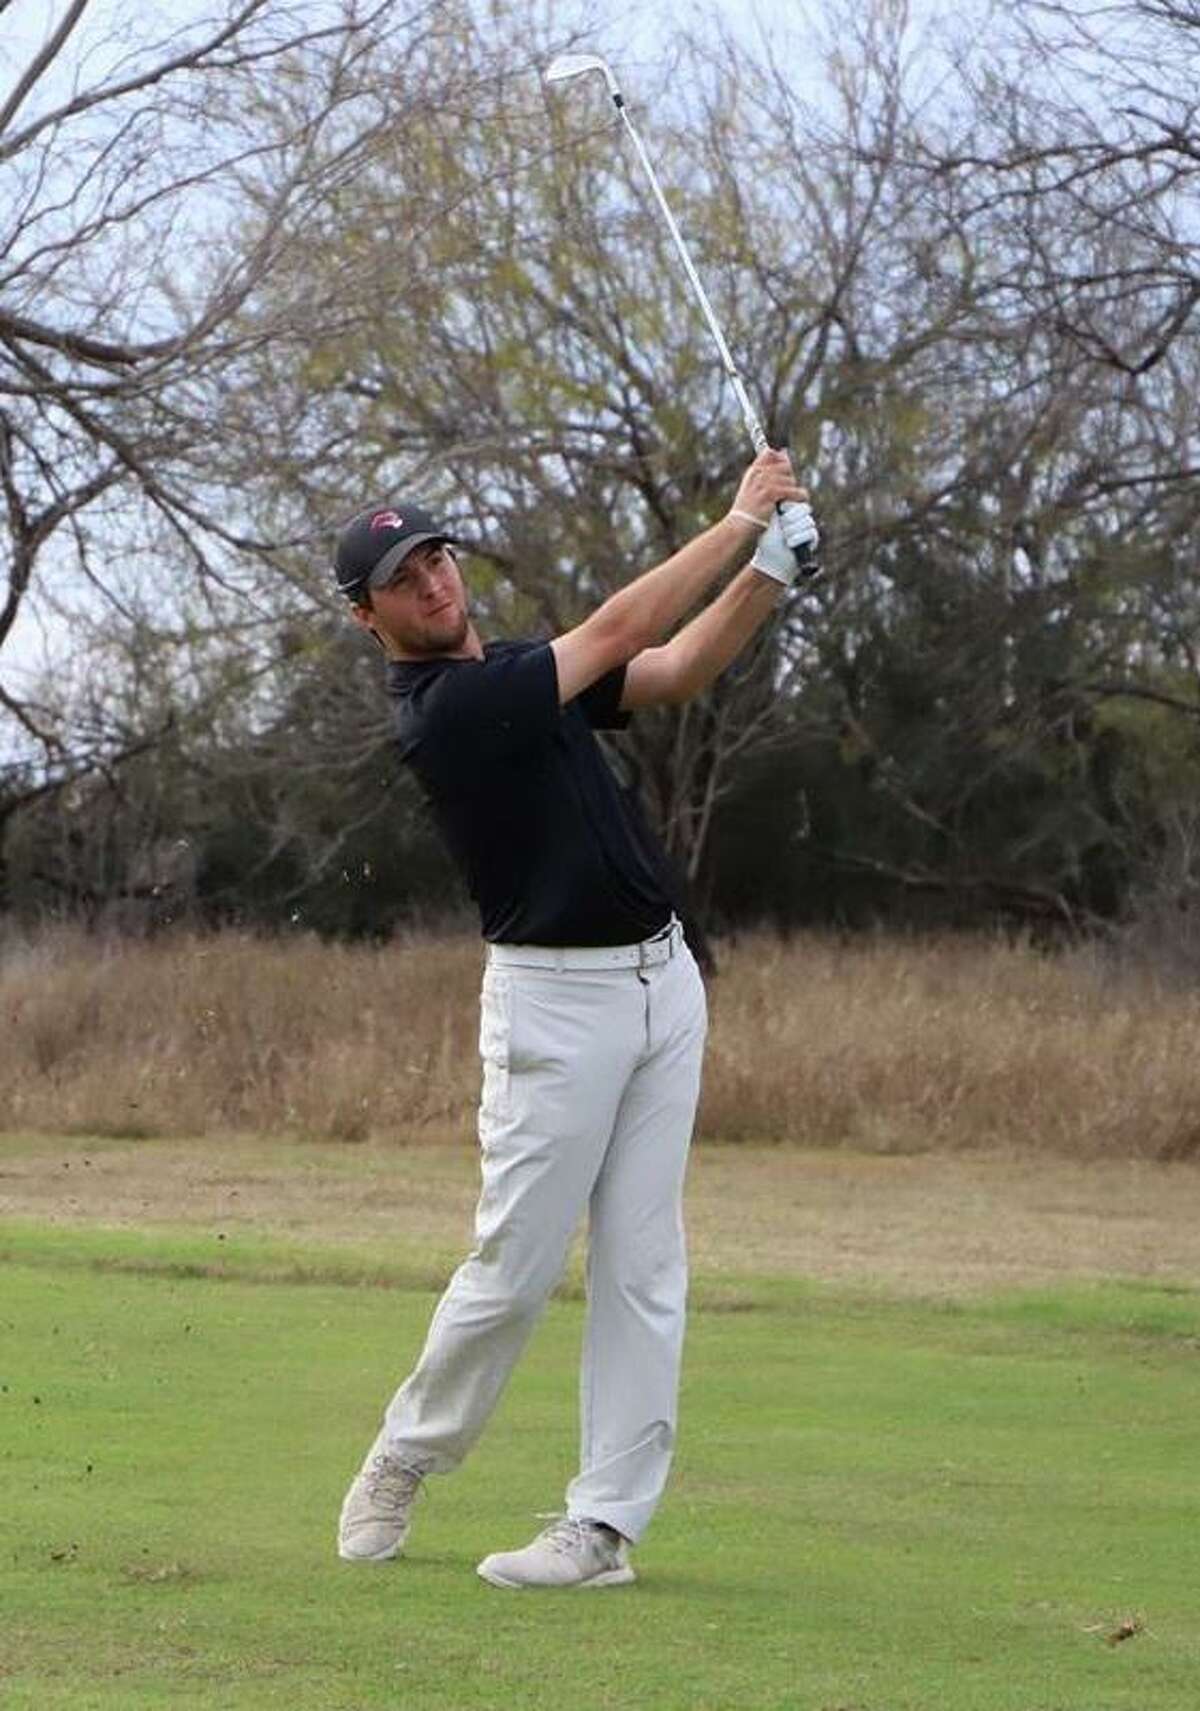 TAMIU senior Parker Holekamp was one of six individual golfers selected to compete in the NCAA South Central/West Super Regional.